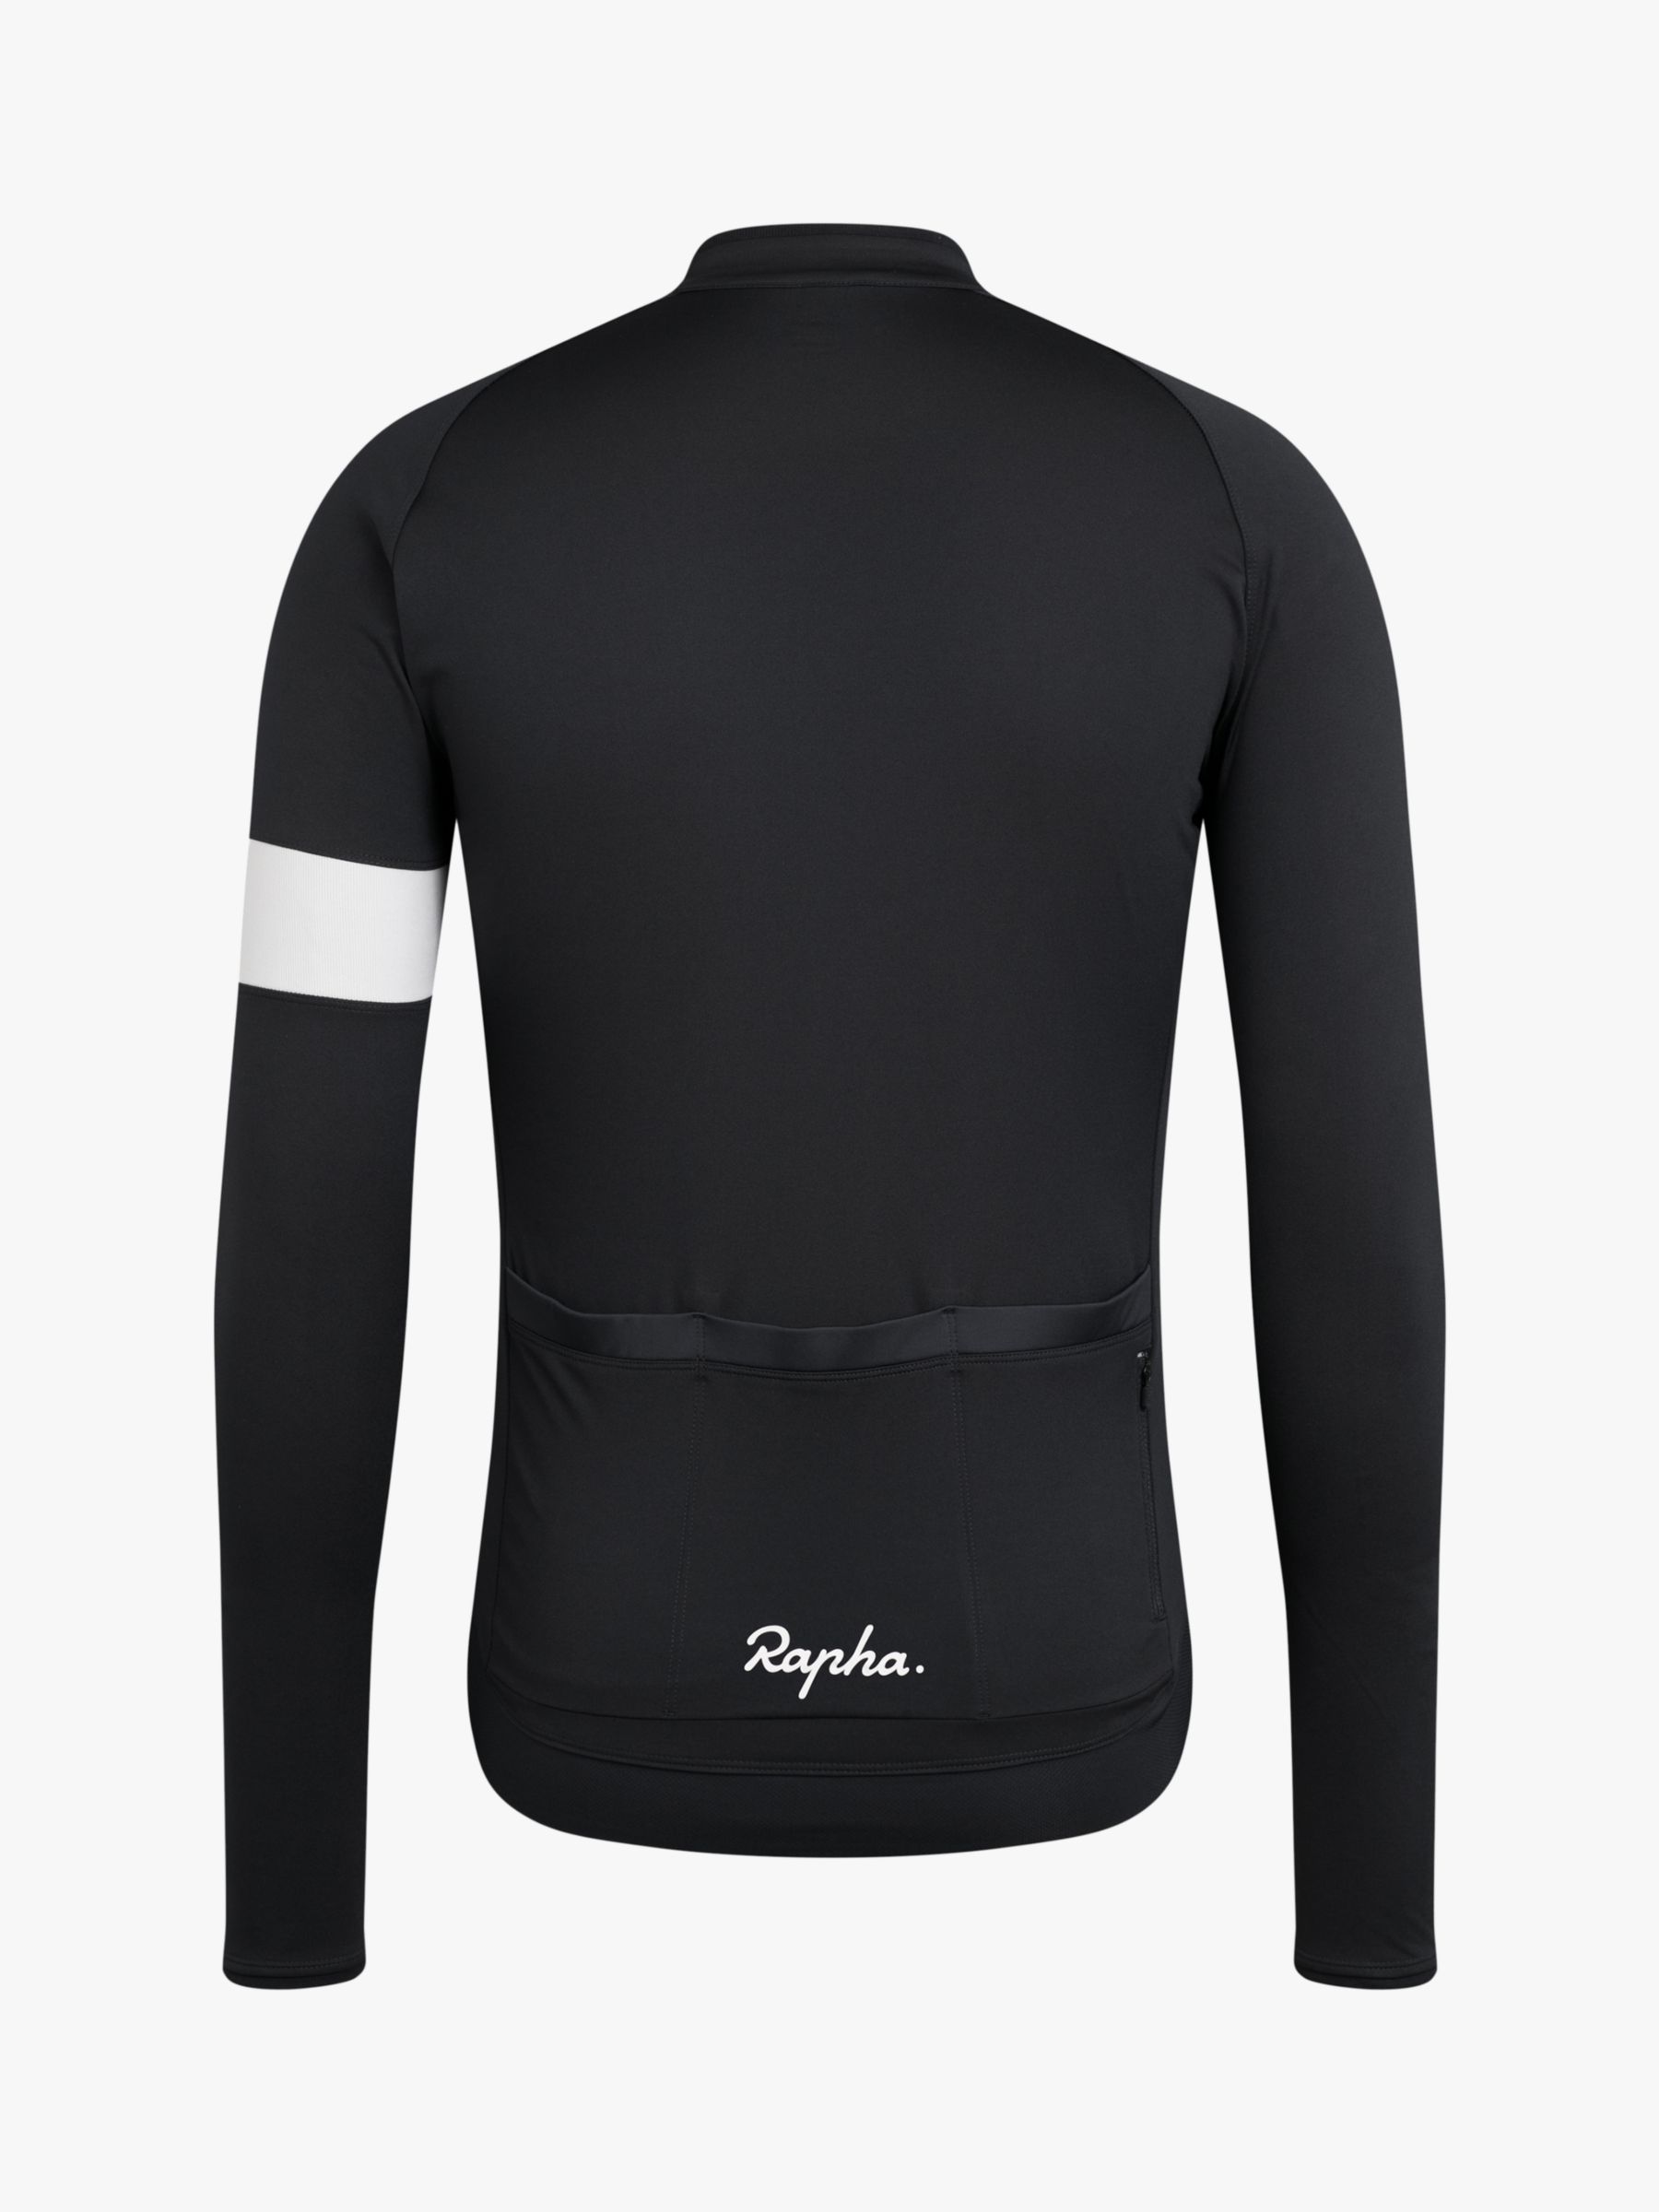 Rapha Core Jersey Long Sleeve Cycling Top, Anthracite, S